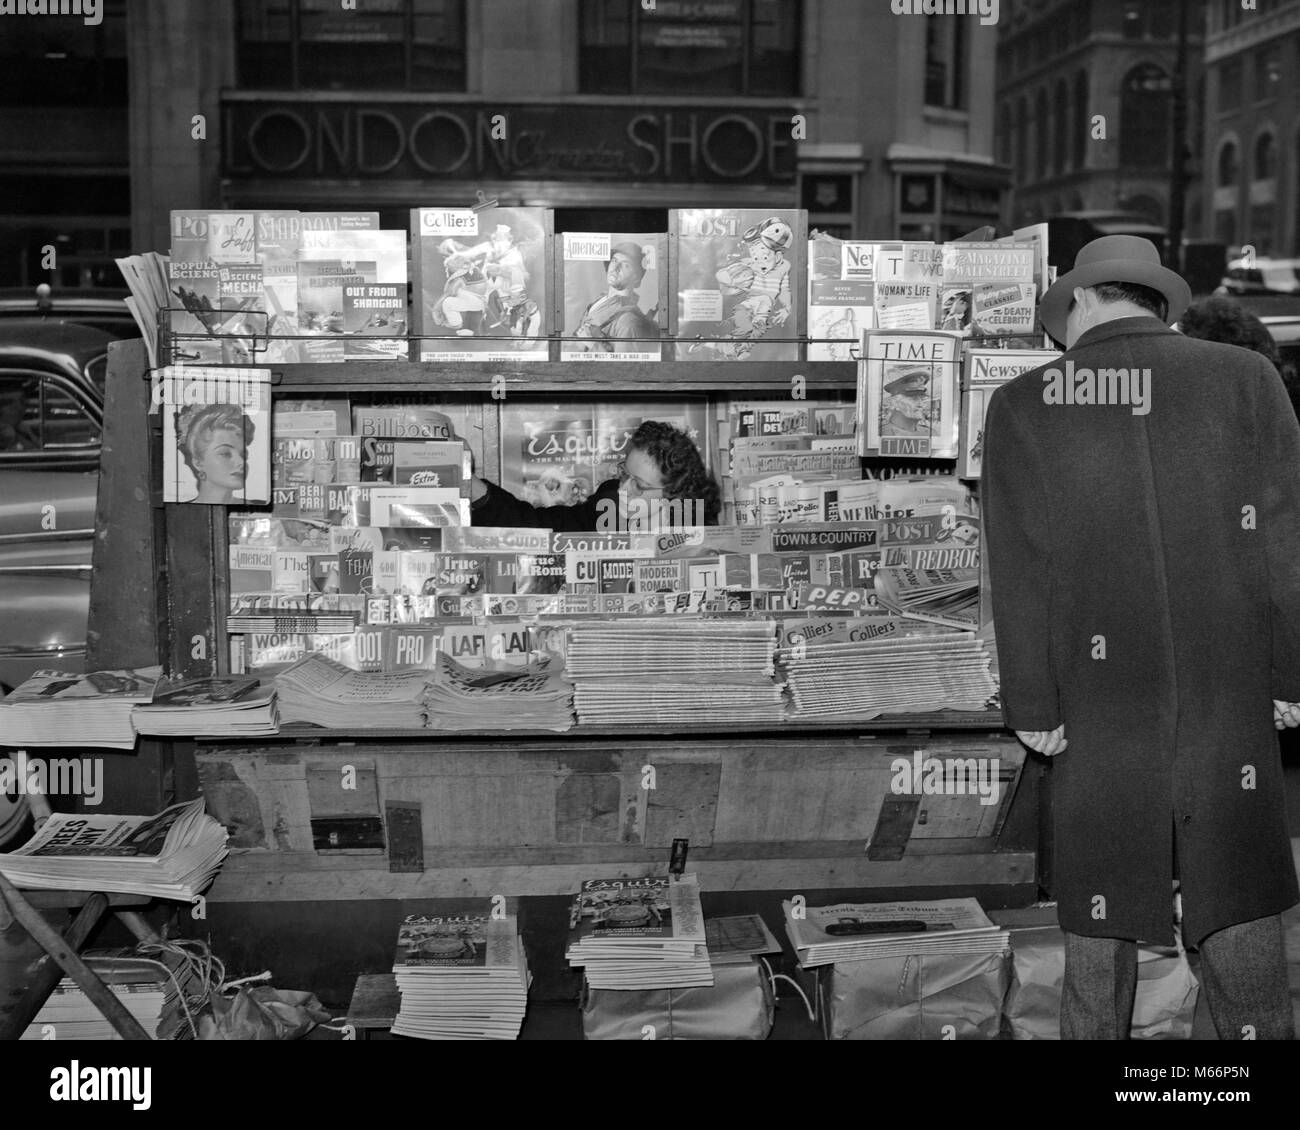 1940s MAGAZINE NEWSSTAND AT NIGHT CORNER 42ND STREET & MADISON AVENUE NEW YORK CITY USA - q43441 CPC001 HARS HALF-LENGTH LADIES UNITED STATES OF AMERICA CORNER NEWSPAPERS NY NOSTALGIA NORTH AMERICA MIDTOWN CUSTOMER SERVICE CHOICE GOTHAM NEWSSTAND MAGAZINES NYC SELECTION NEW YORK CITIES NEW YORK CITY MALES 42ND B&W BIG APPLE BLACK AND WHITE CAUCASIAN ETHNICITY MADISON OCCUPATIONS OLD FASHIONED PERIODICALS PERSONS PUBLICATIONS PUBLISHING TABLOIDS Stock Photo